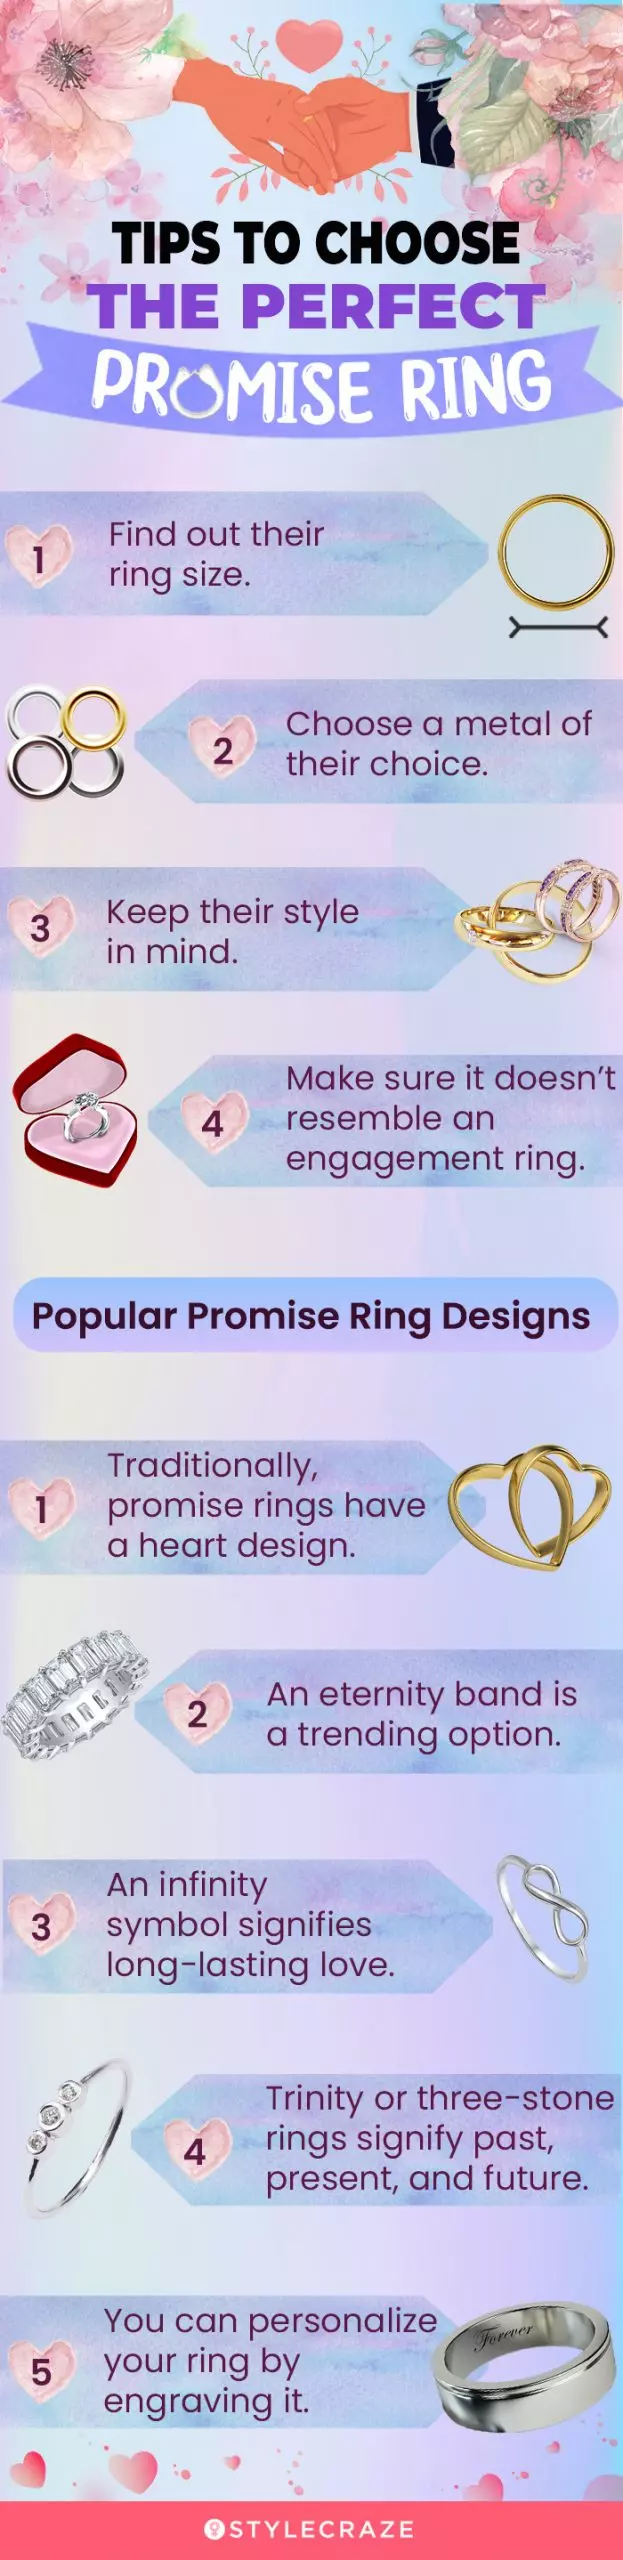 tips to choose the perfect promise ring (infographic)